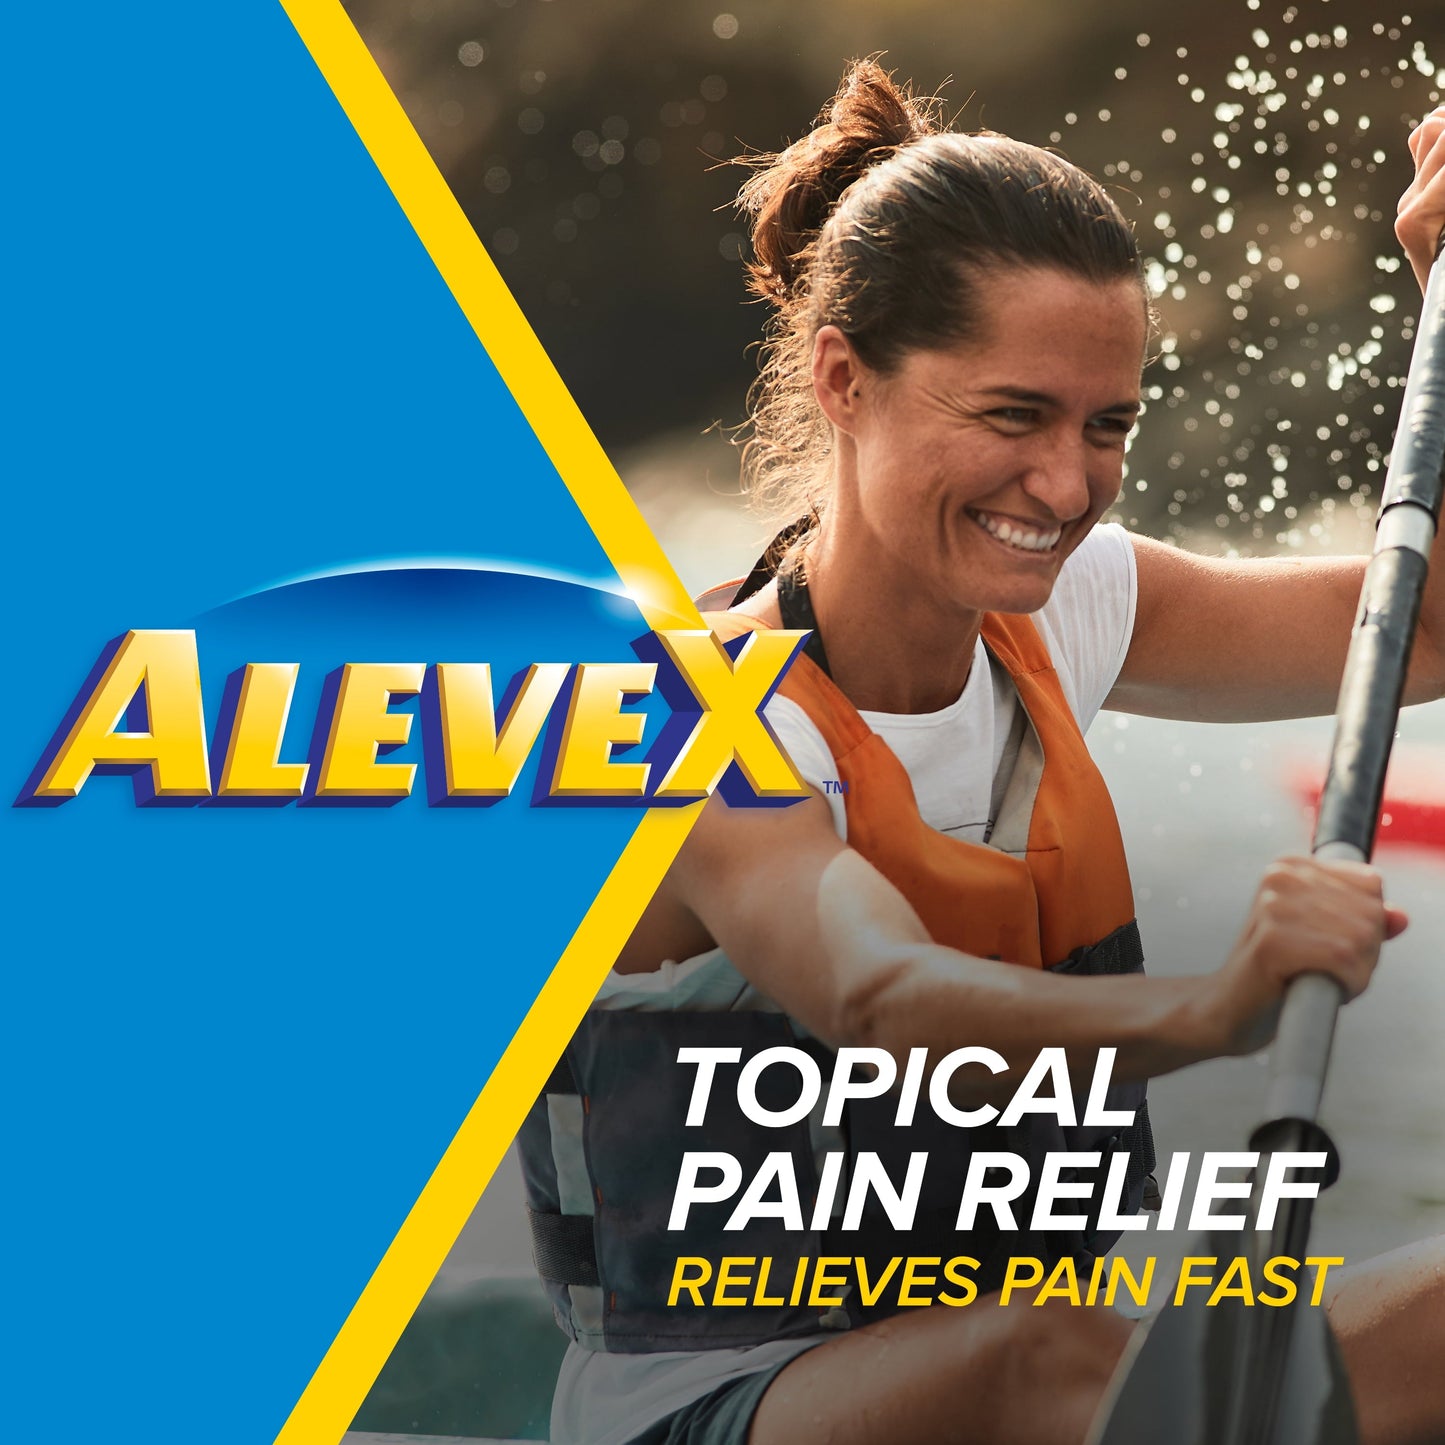 AleveX Pain Relieving Lotion with Rollerball Applicator, Topical Pain Reliever, 2.5oz